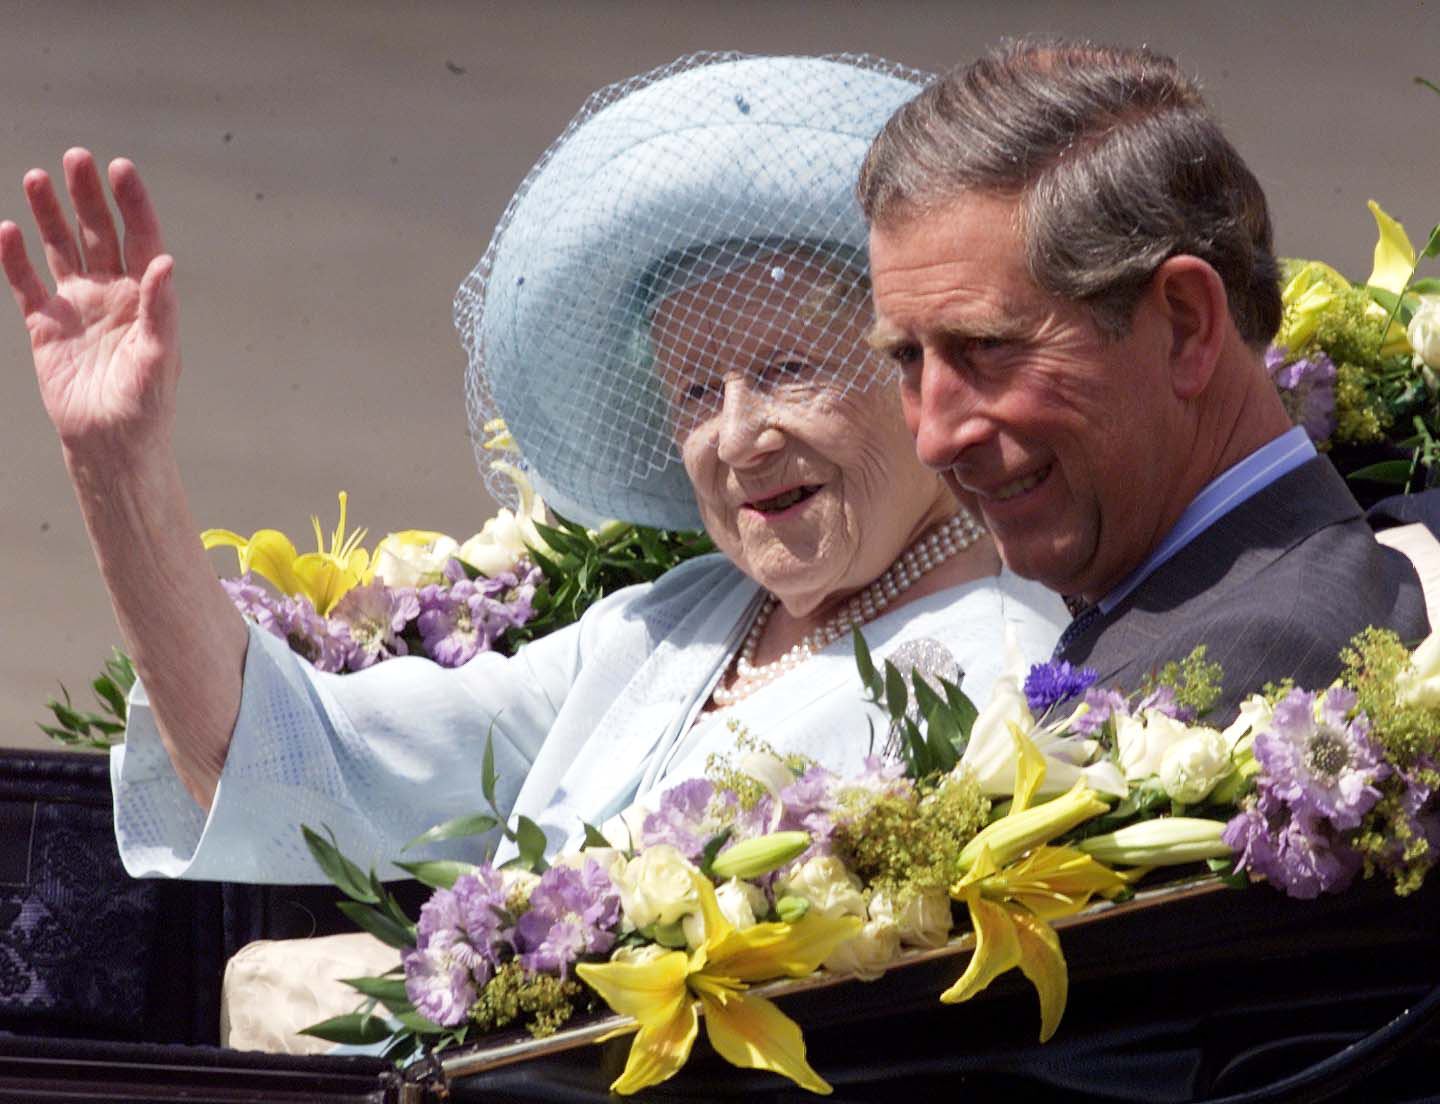 The Queen Mother waves alongside Prince Charles as she arrives at Buckingham Palace on her 100th birthday